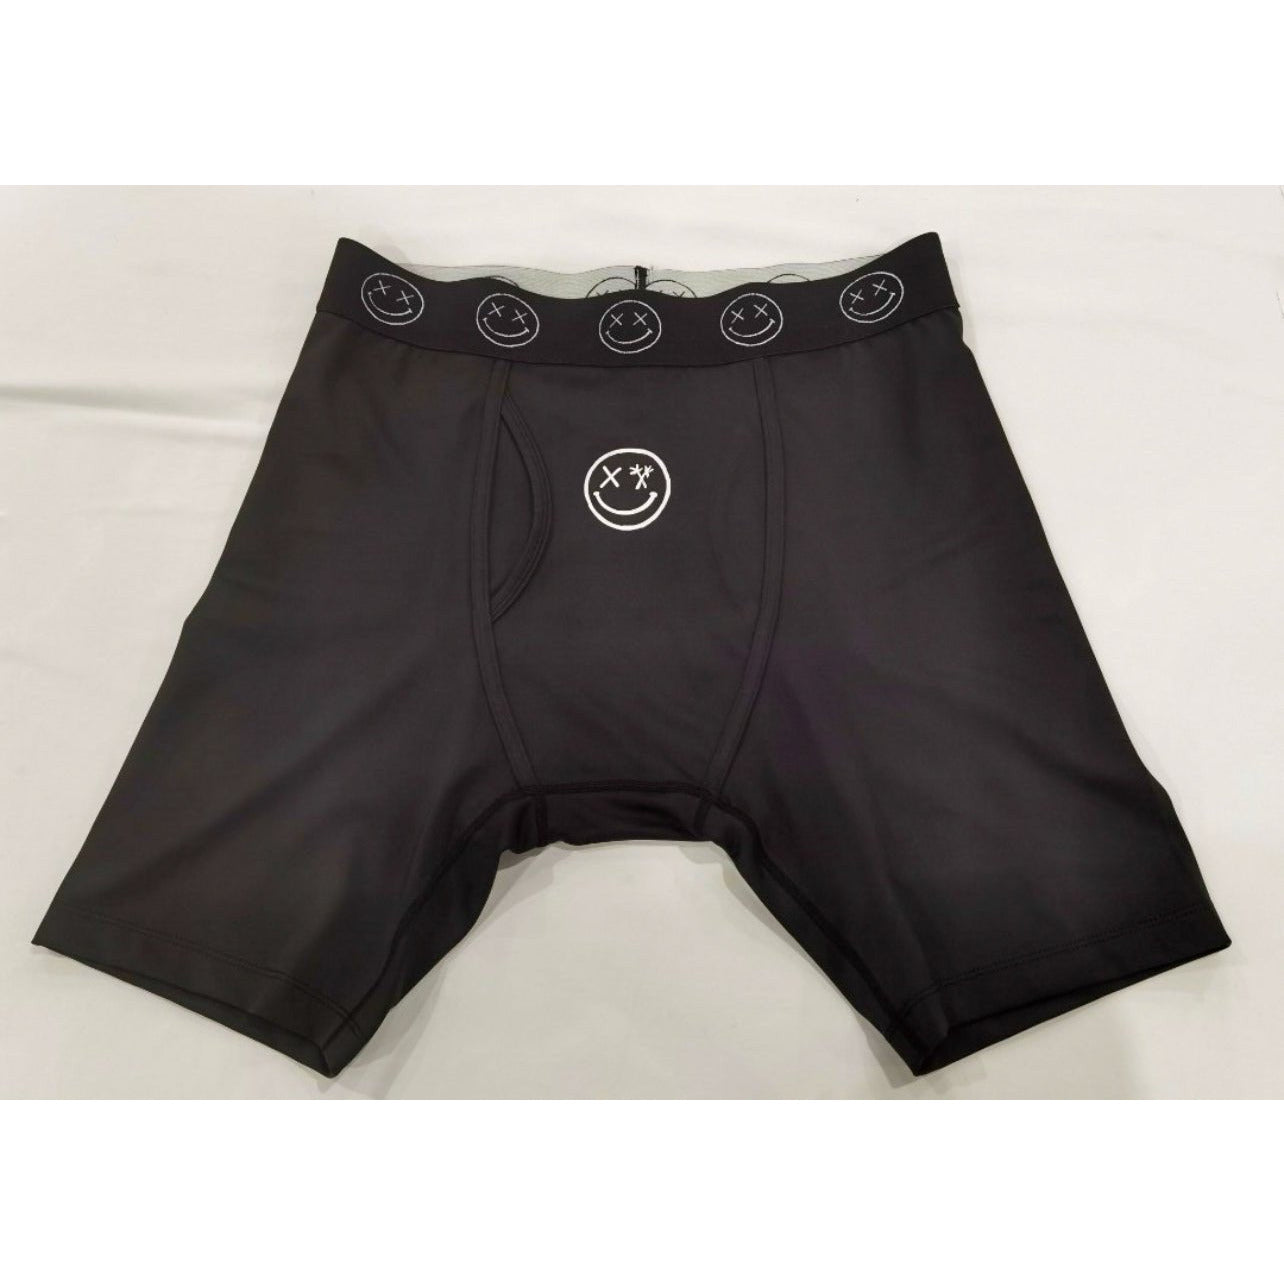 https://saltysavage.com/cdn/shop/products/salty-savage-mens-happy-thoughts-performance-briefs-wet-suit-performance-underwear-dudes-shorts-salty-savage-635401.jpg?v=1687105575